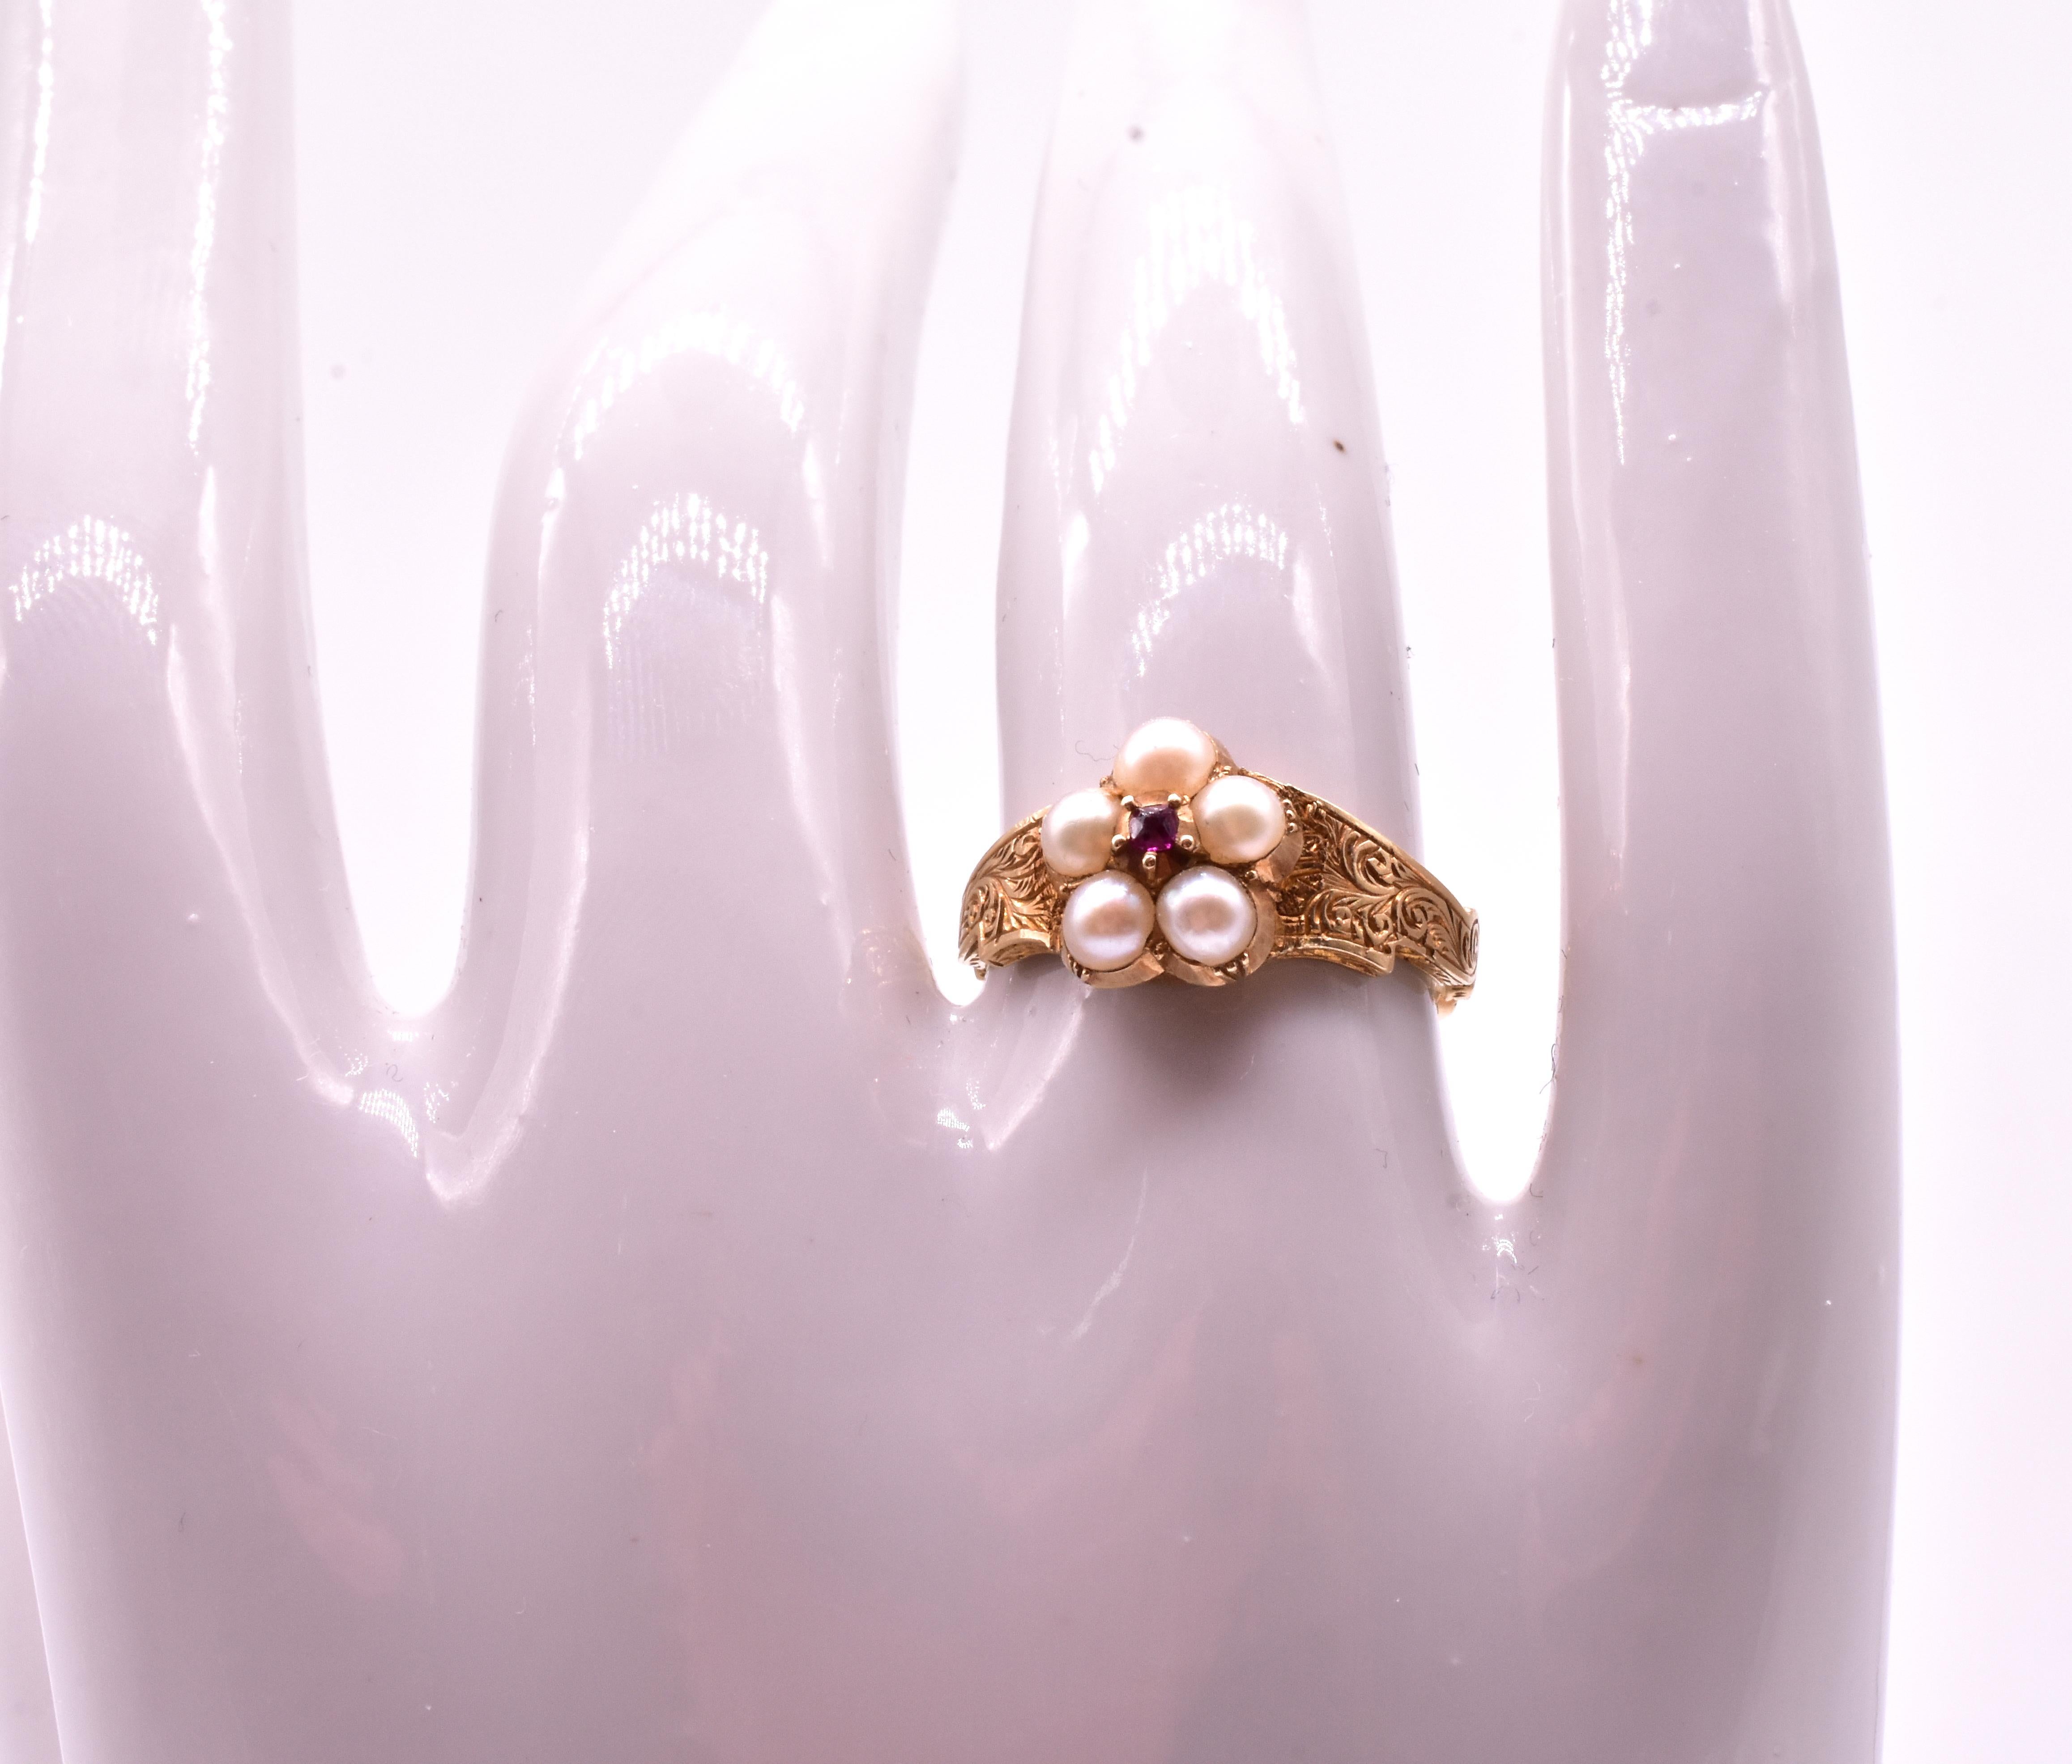 Old European Cut Antique Pearl Forget Me Not 18K Ring with Pink Sapphire Center, circa 1830